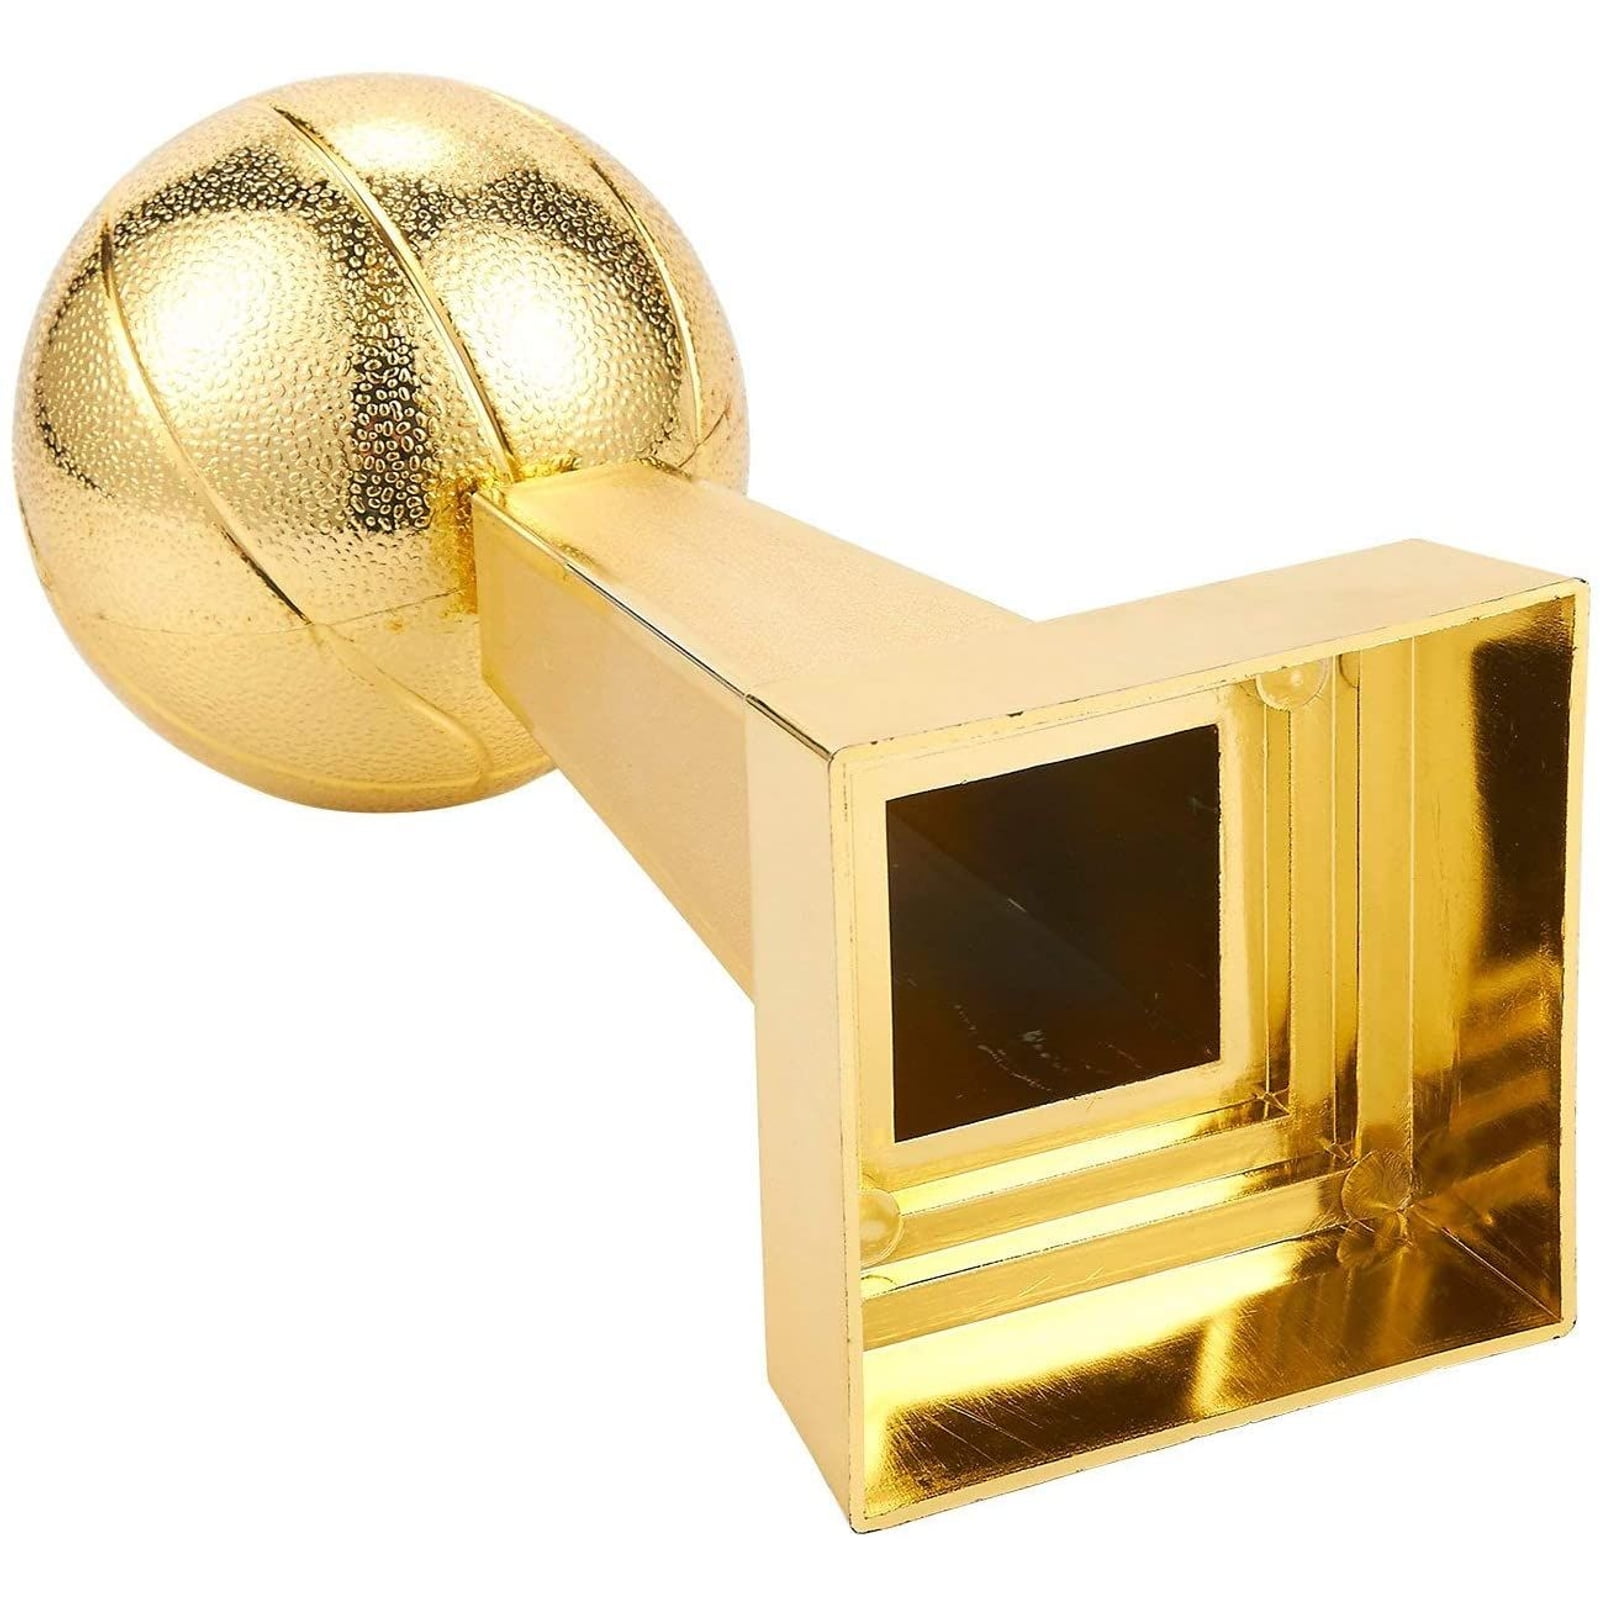 Basketball Trophy - Gold Award Trophy for Sports Tournaments, Competitions,  3 X 9.5 X 3 inches